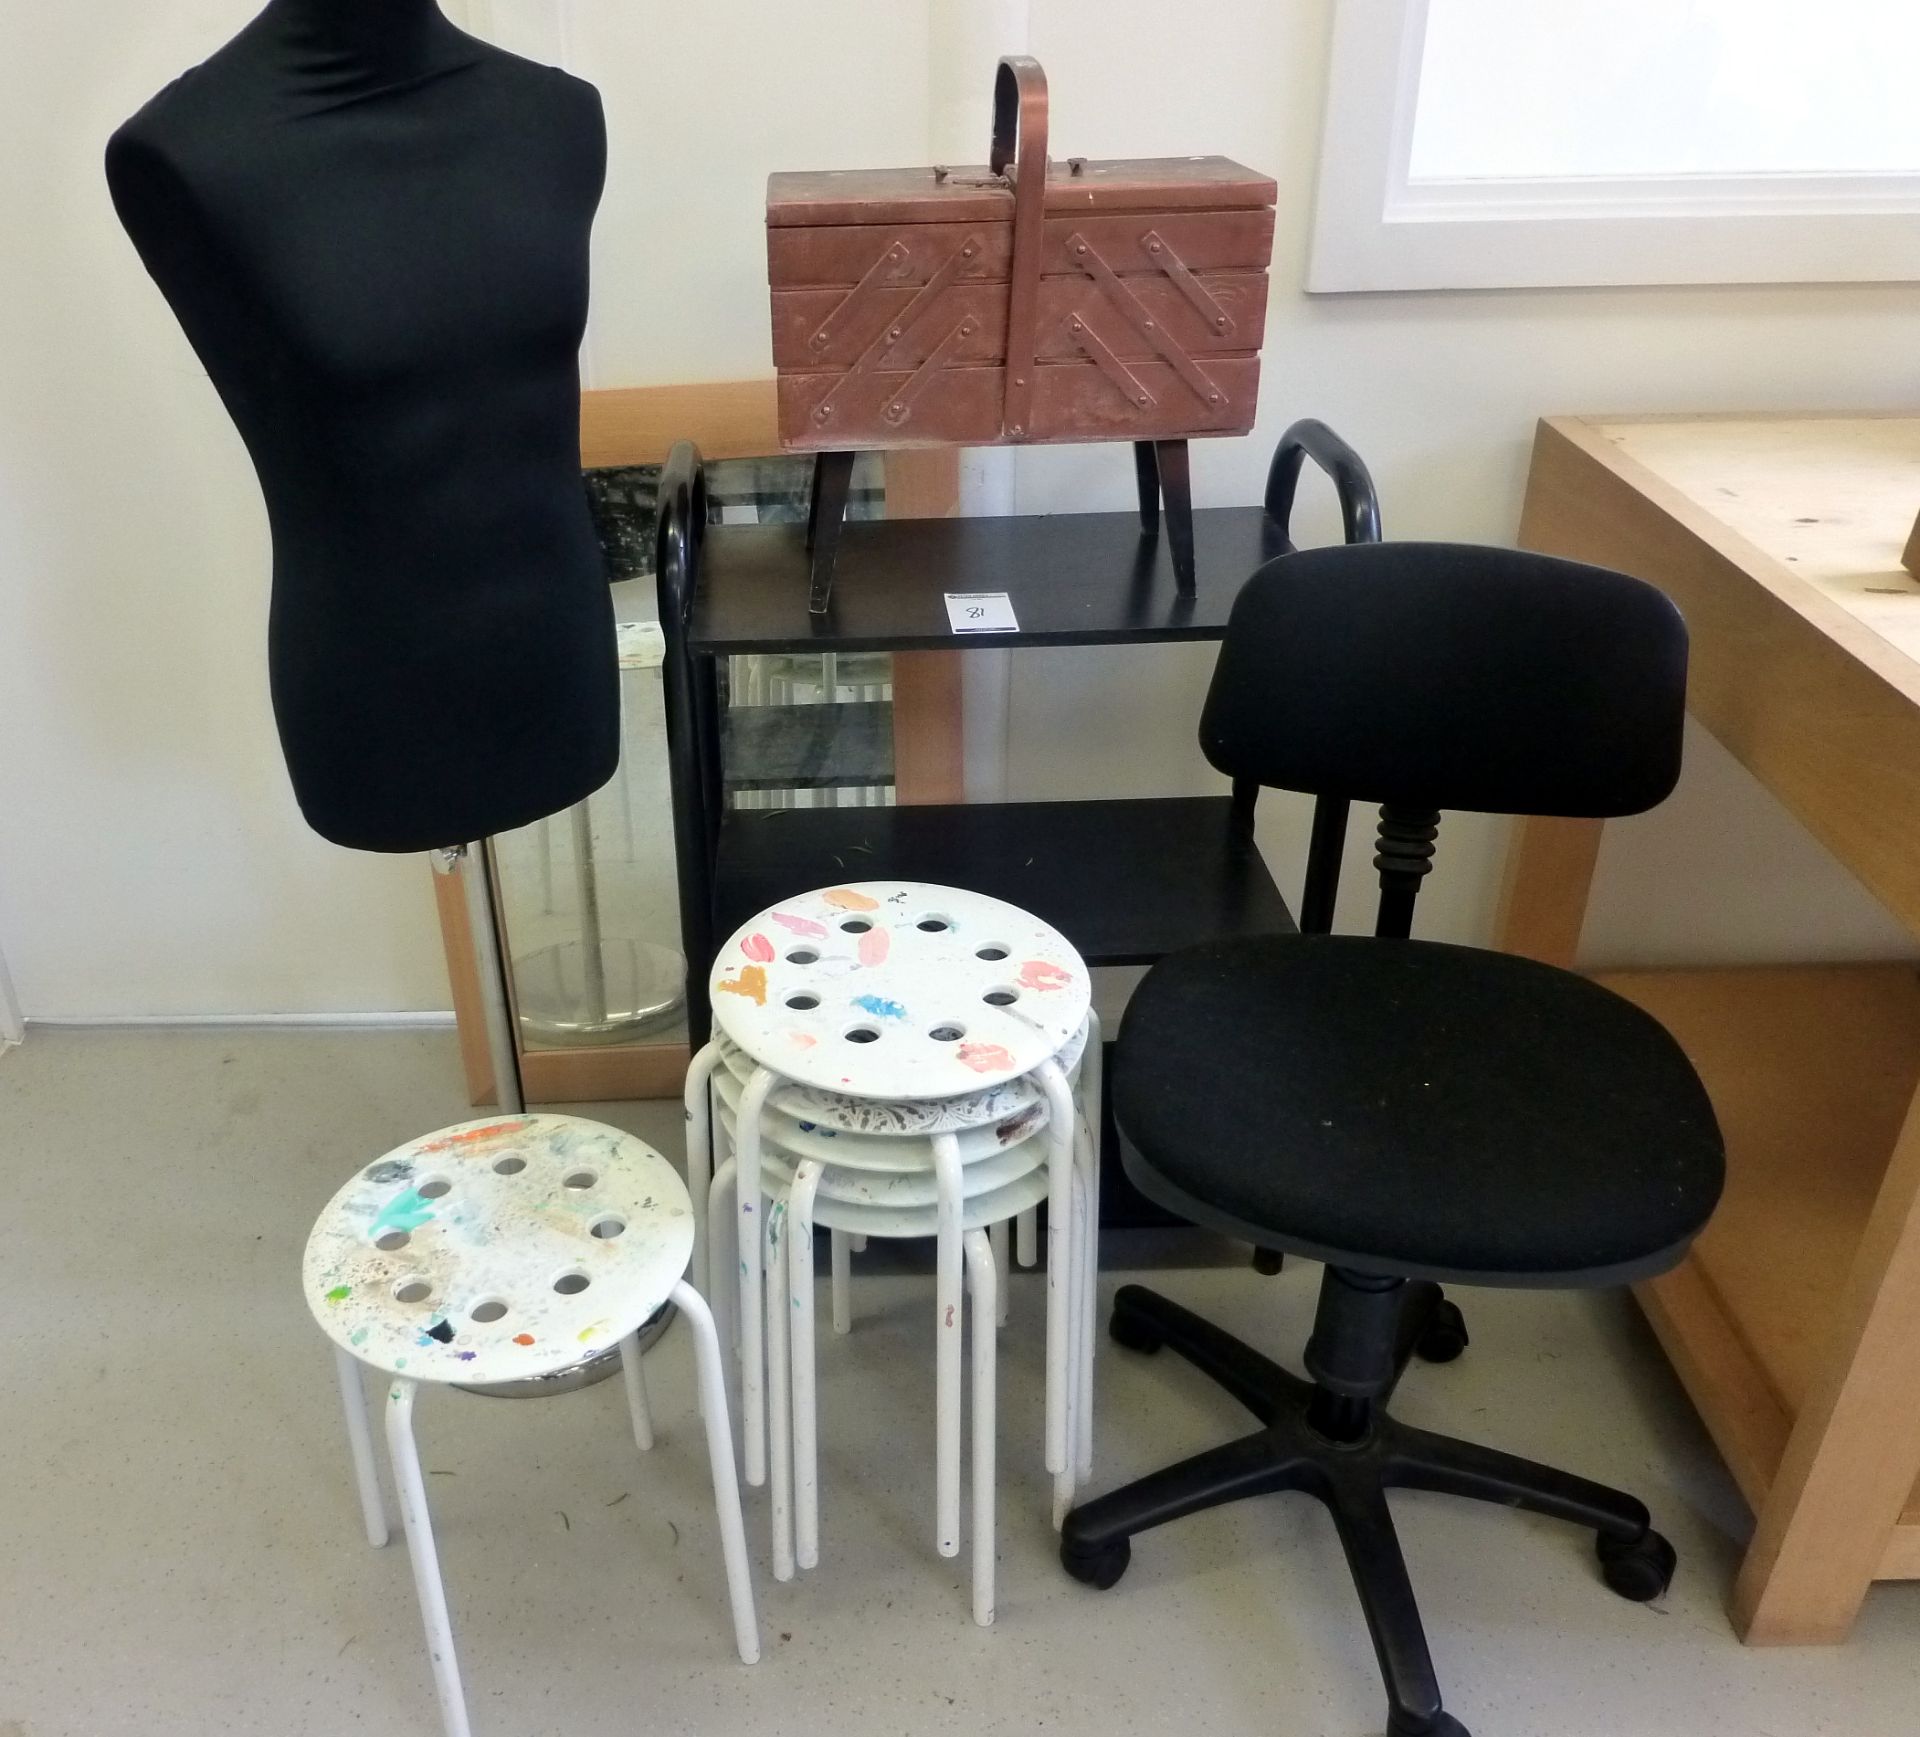 6 Artist Palate Stools, Mannequin on Stand, 3-Tier Rack, Framed Mirror, Cantilever Storage Box &